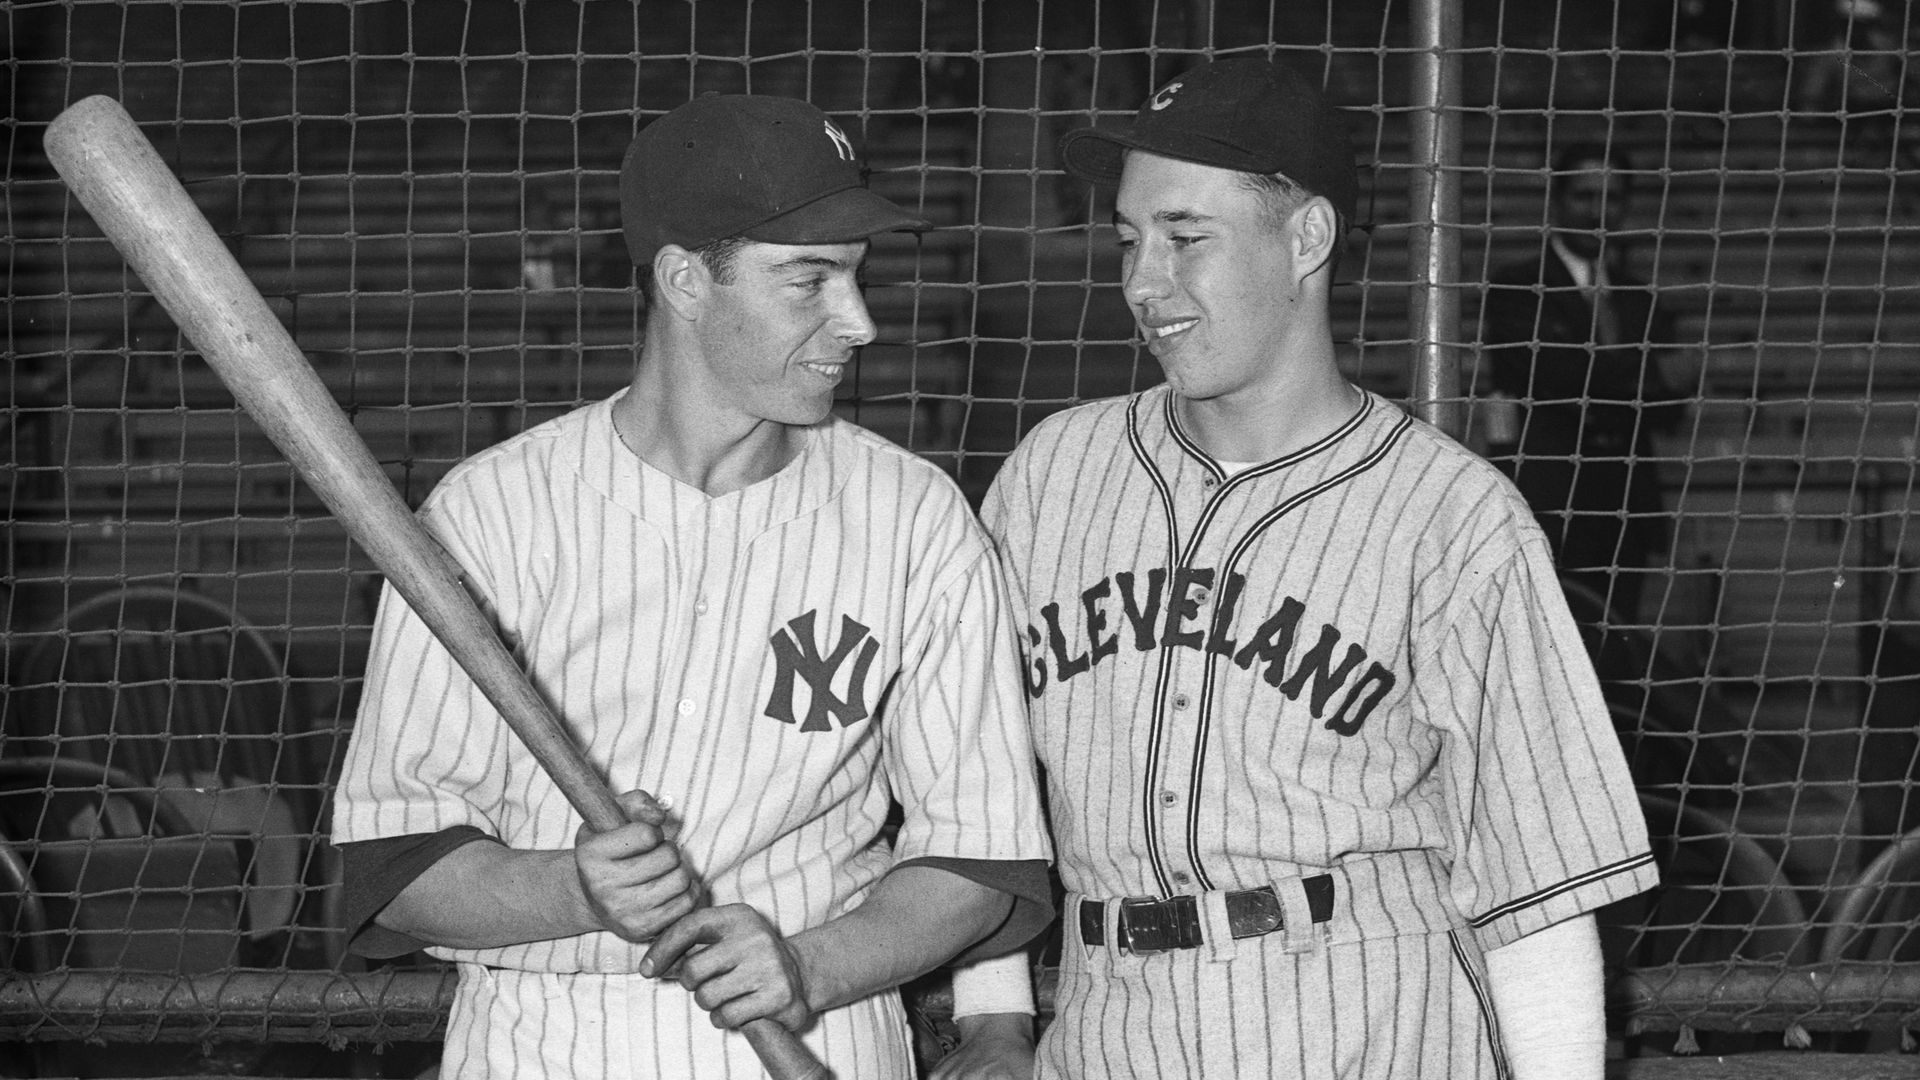 Baseball players Joe DiMaggio and Bob Feller stand next to each other near home plate. 